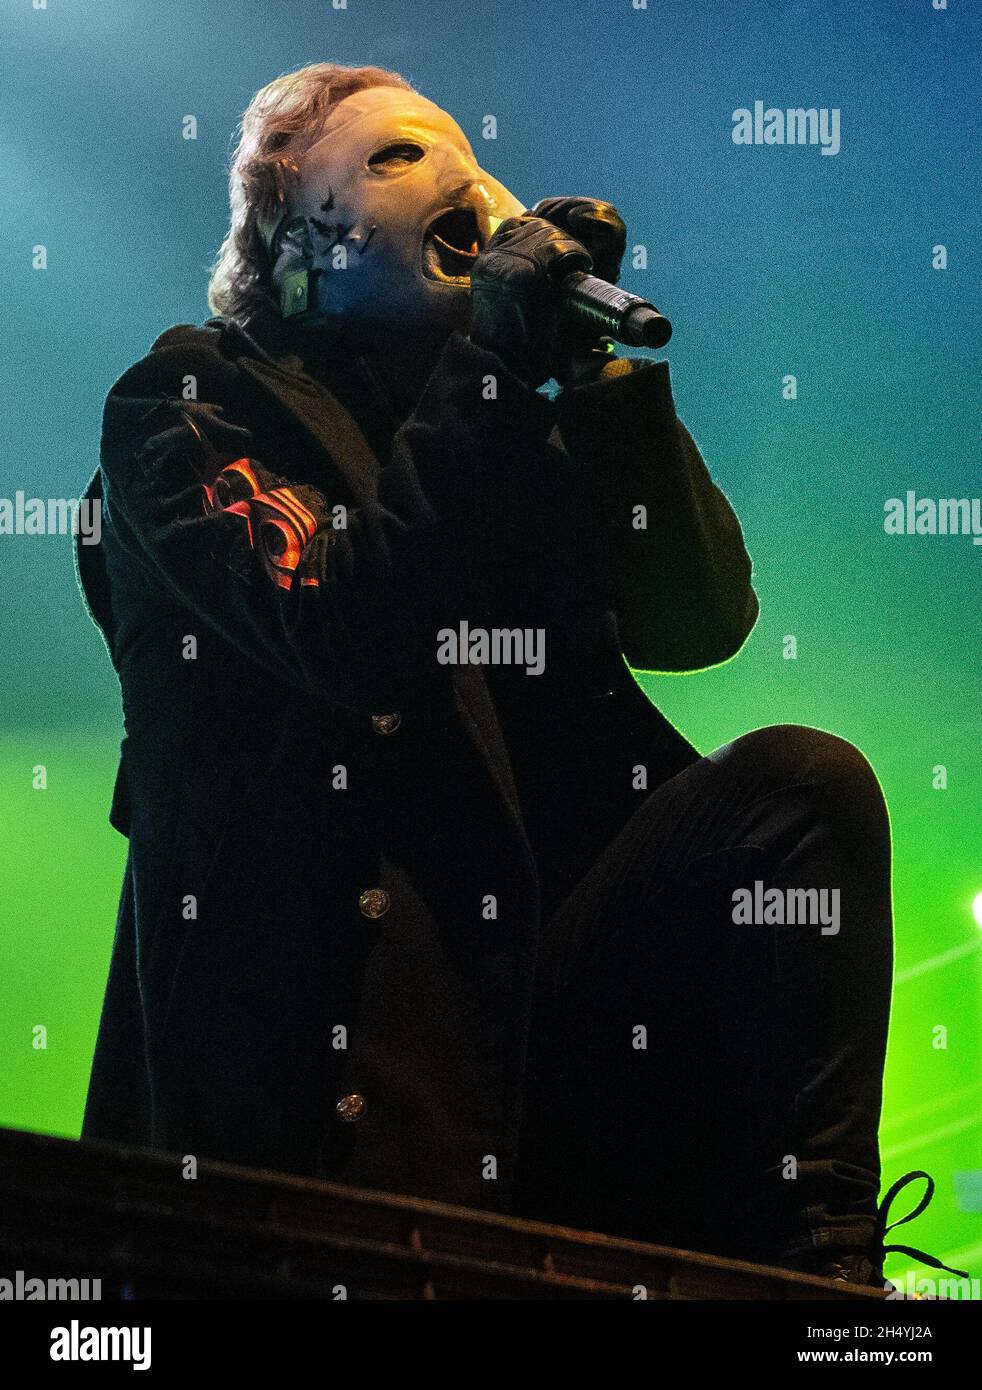 Corey Taylor of Slipknot performs on stage at Arena Birmingham during We Are Not Your Kind World Tour on 24 January 2020 in Birmingham, UK. Picture date: Friday 24 January 2020. Photo credit: Katja Ogrin/EMPICS Entertainment. EDITORIAL USE ONLY Stock Photo